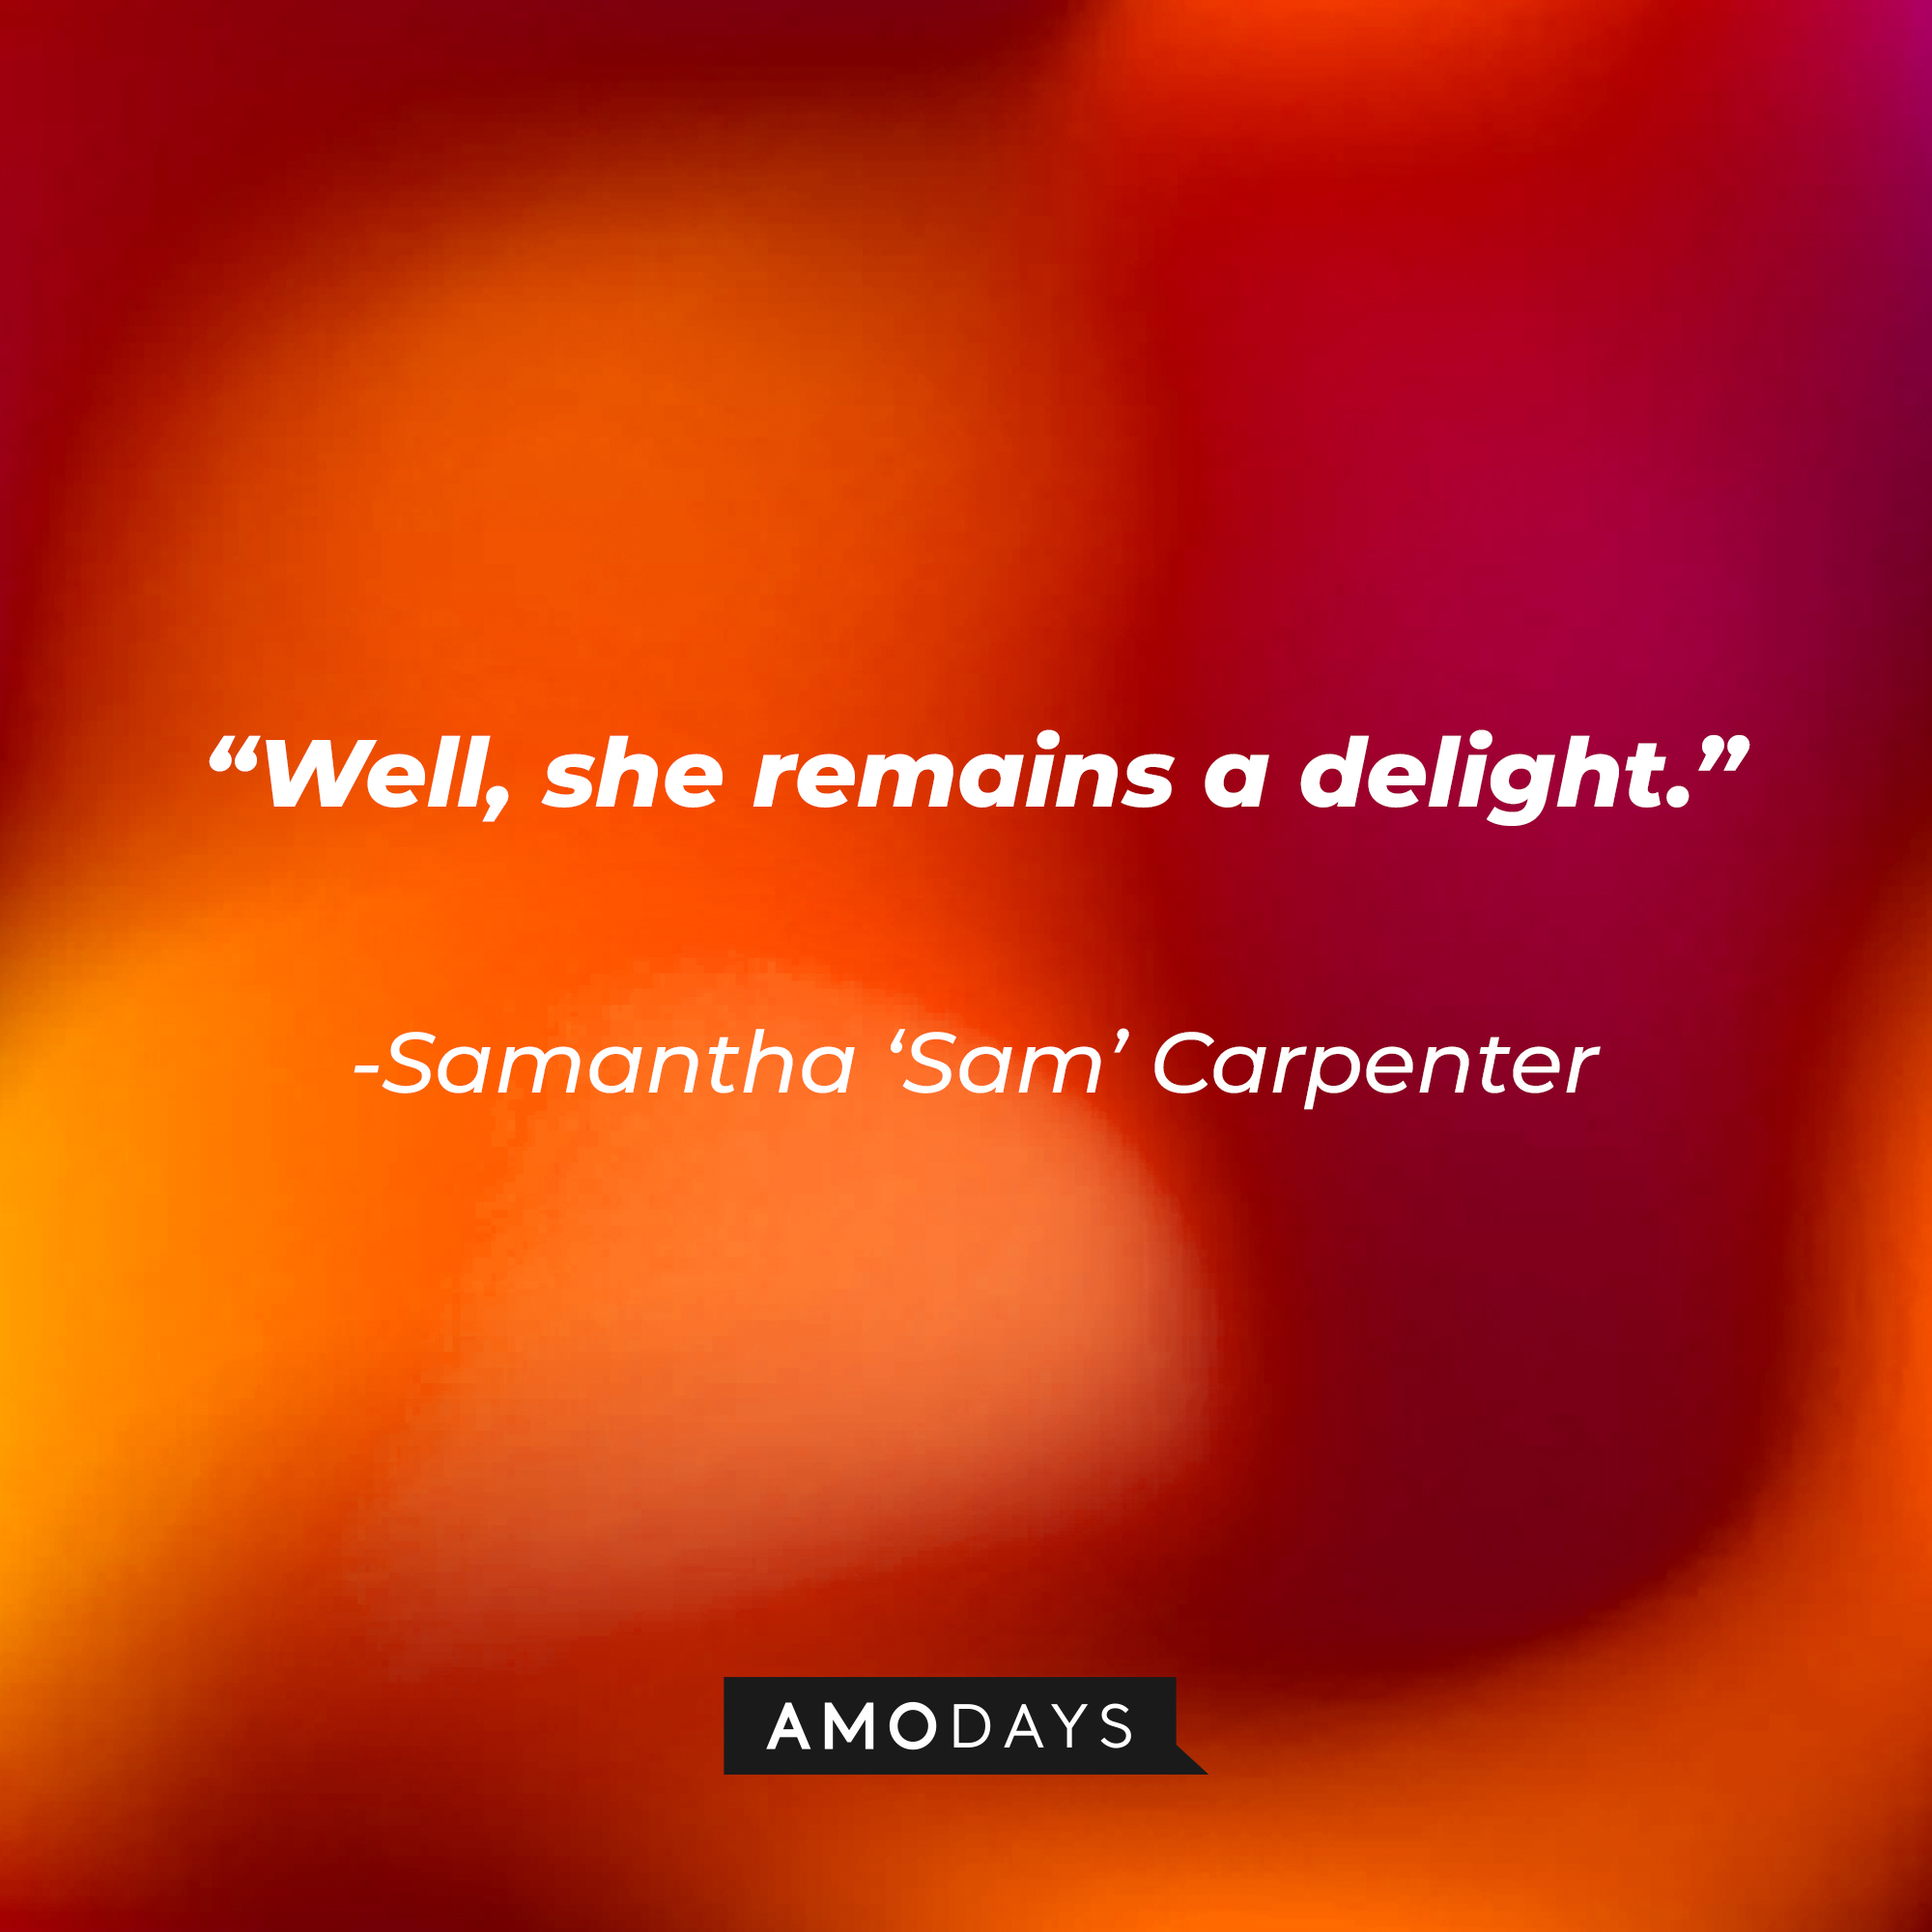 Samantha ‘Sam’ Carpenter’s quote from "Scream '(2020)'": “Well, she remains a delight.” | Source: AmoDays